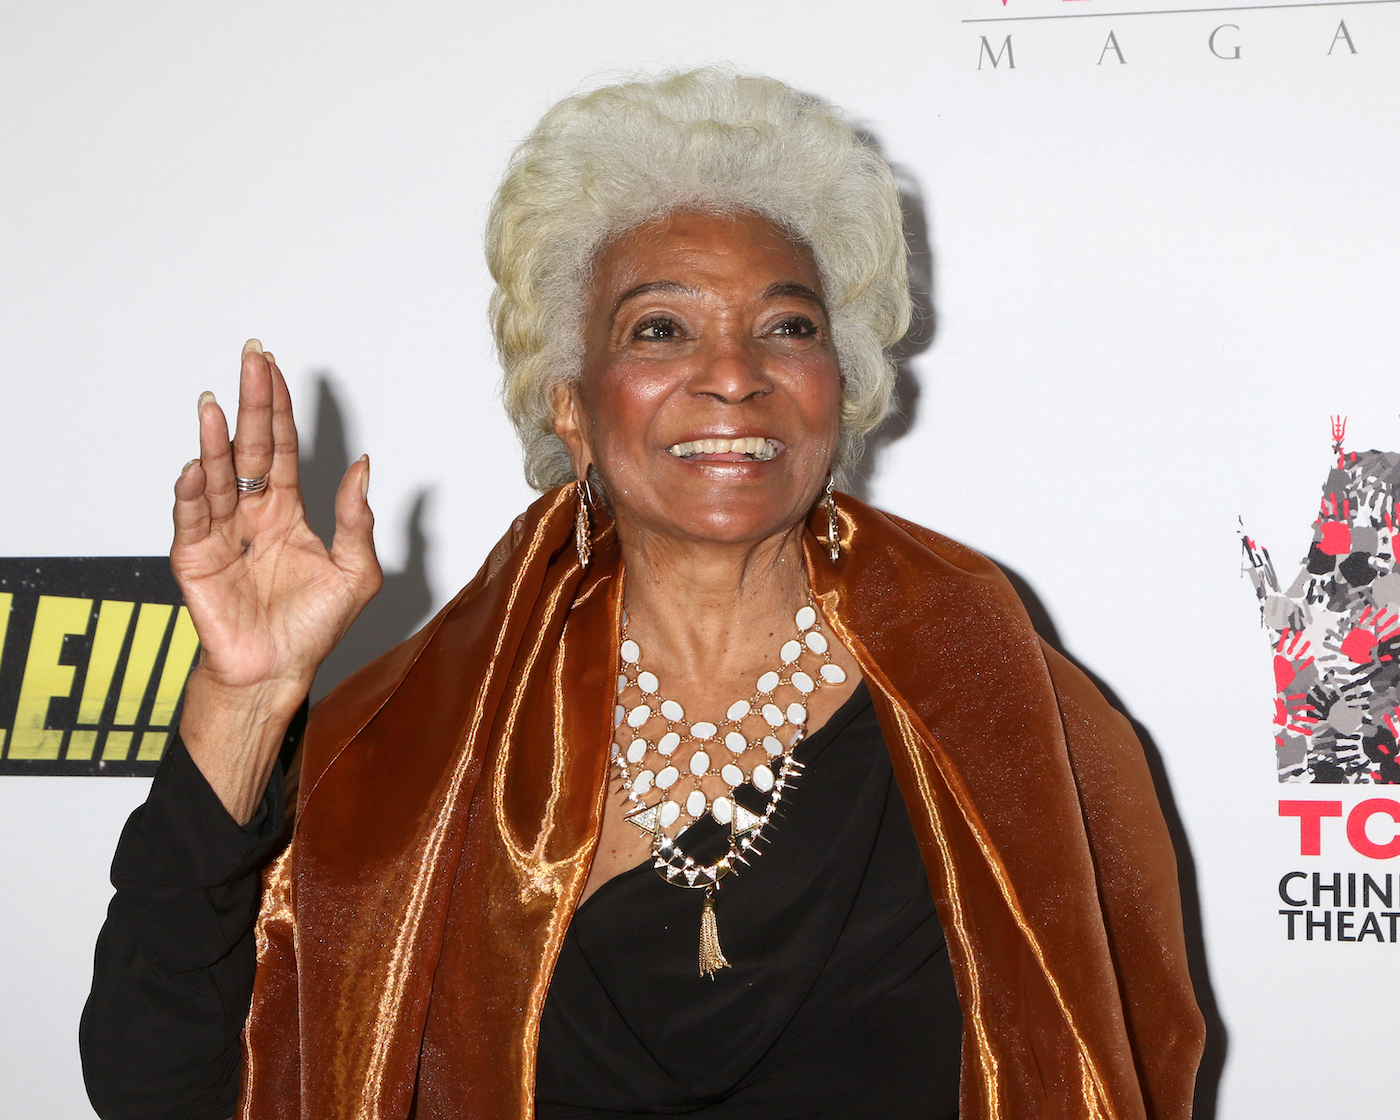 Nichelle Nichols at a premiere, wearing a black shirt, a caramel colored velvet shawl and a pearl necklace, waves. She looks to the upper right hand corner of the frame, smiling. 